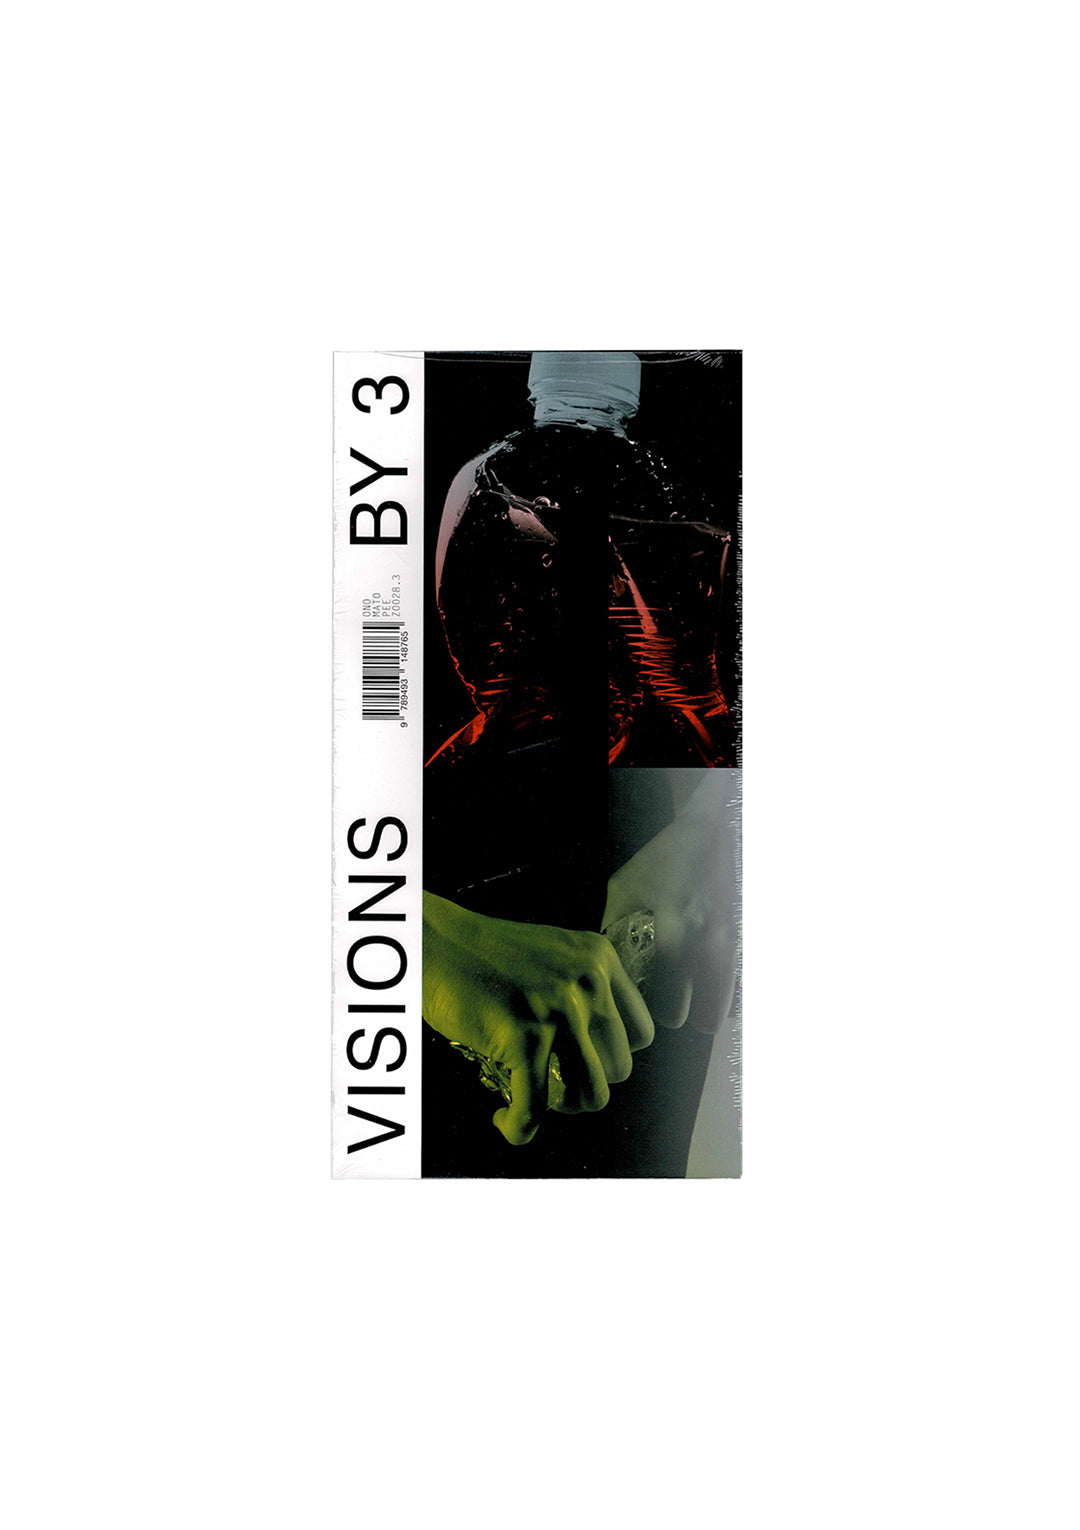 VISIONS BY Issue No. 3